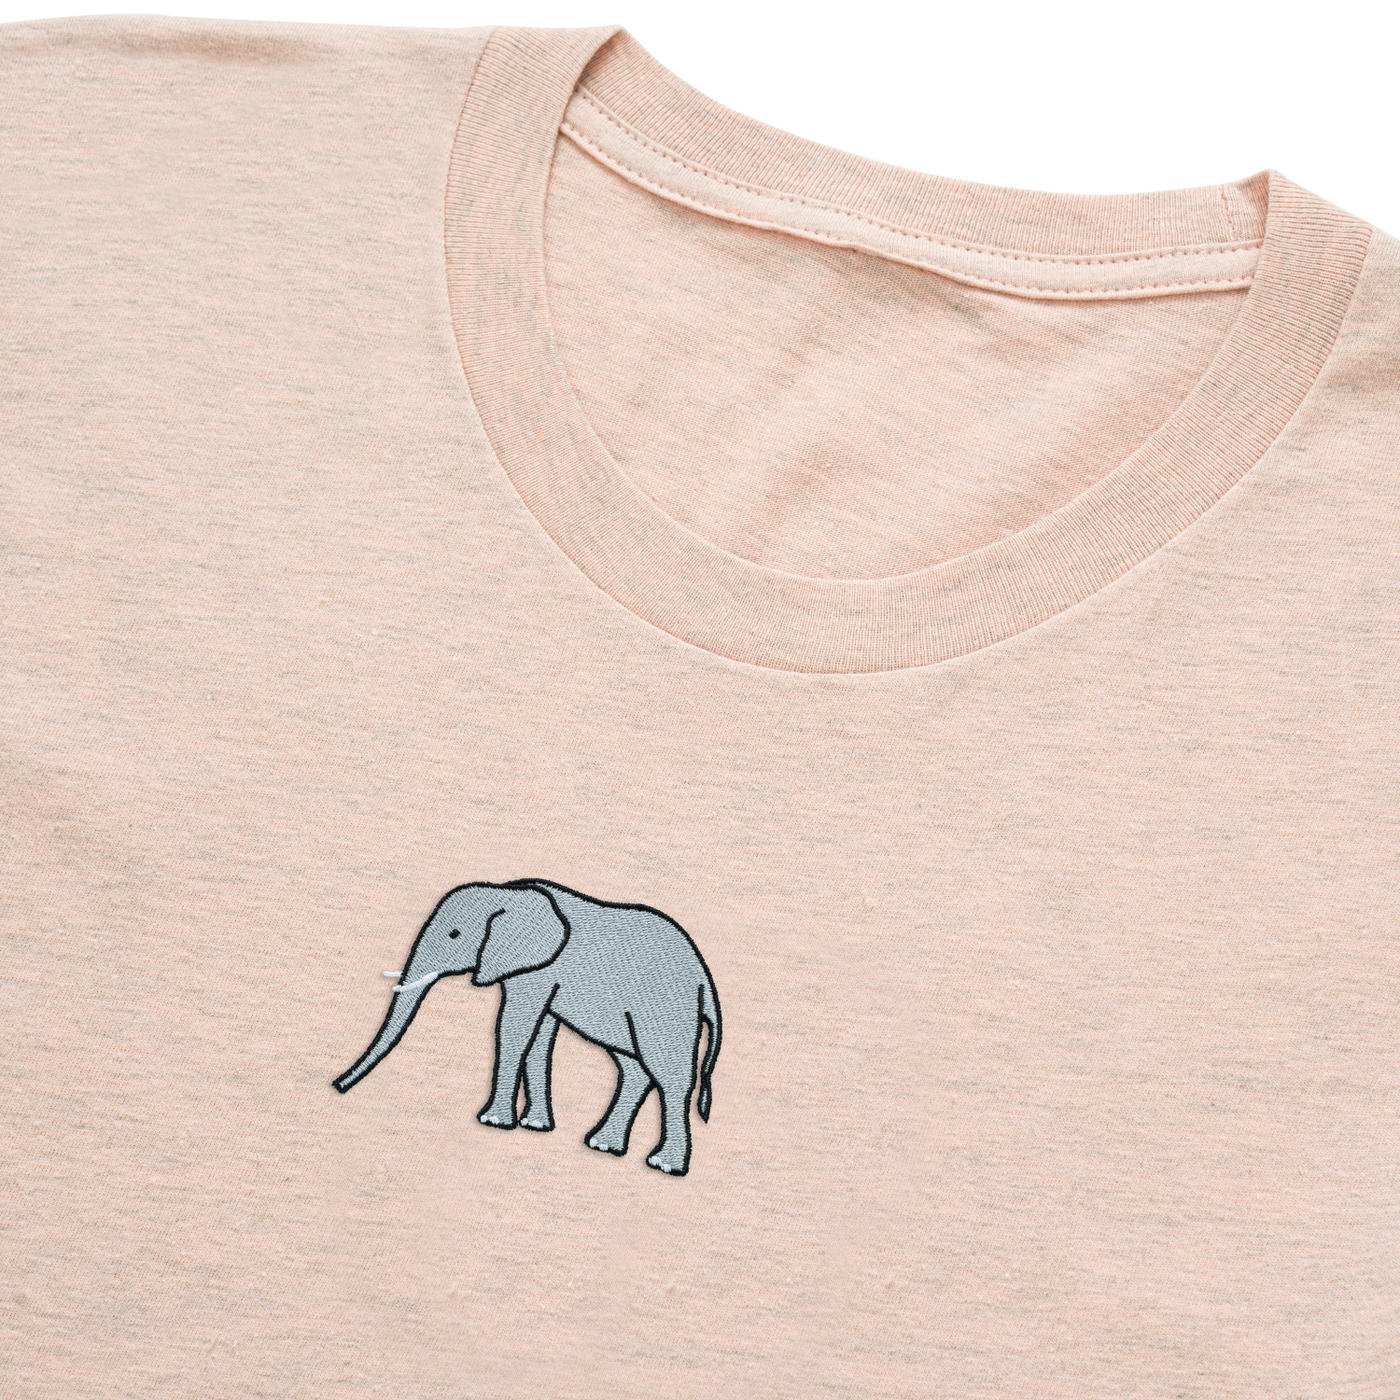 Bobby's Planet Women's Embroidered Elephant T-Shirt from African Animals Collection in Heather Prism Peach Color#color_heather-prism-peach